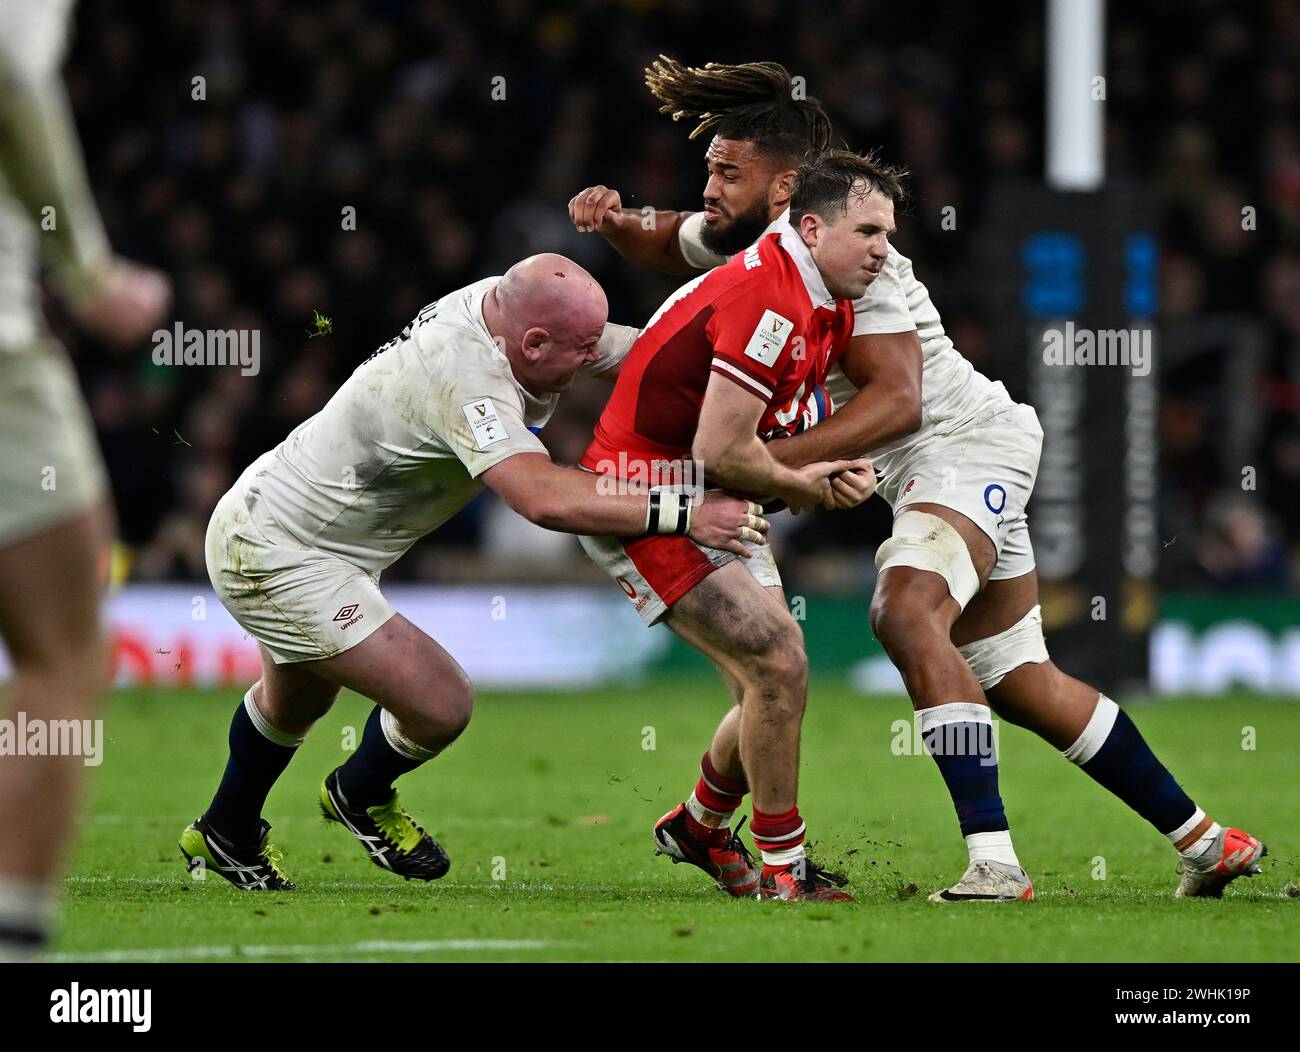 Twickenham, United Kingdom. 10th Feb, 2024. England V Wales, Guinness 6 Nations. Twickenham Stadium. Twickenham. Ioan Lloyd (Wales) is tackled by Dan Cole (England, letf) and Chandler Cunningham-South (England) during the England V Wales rugby match in the Guinness 6 Nations. Credit: Sport In Pictures/Alamy Live News Stock Photo